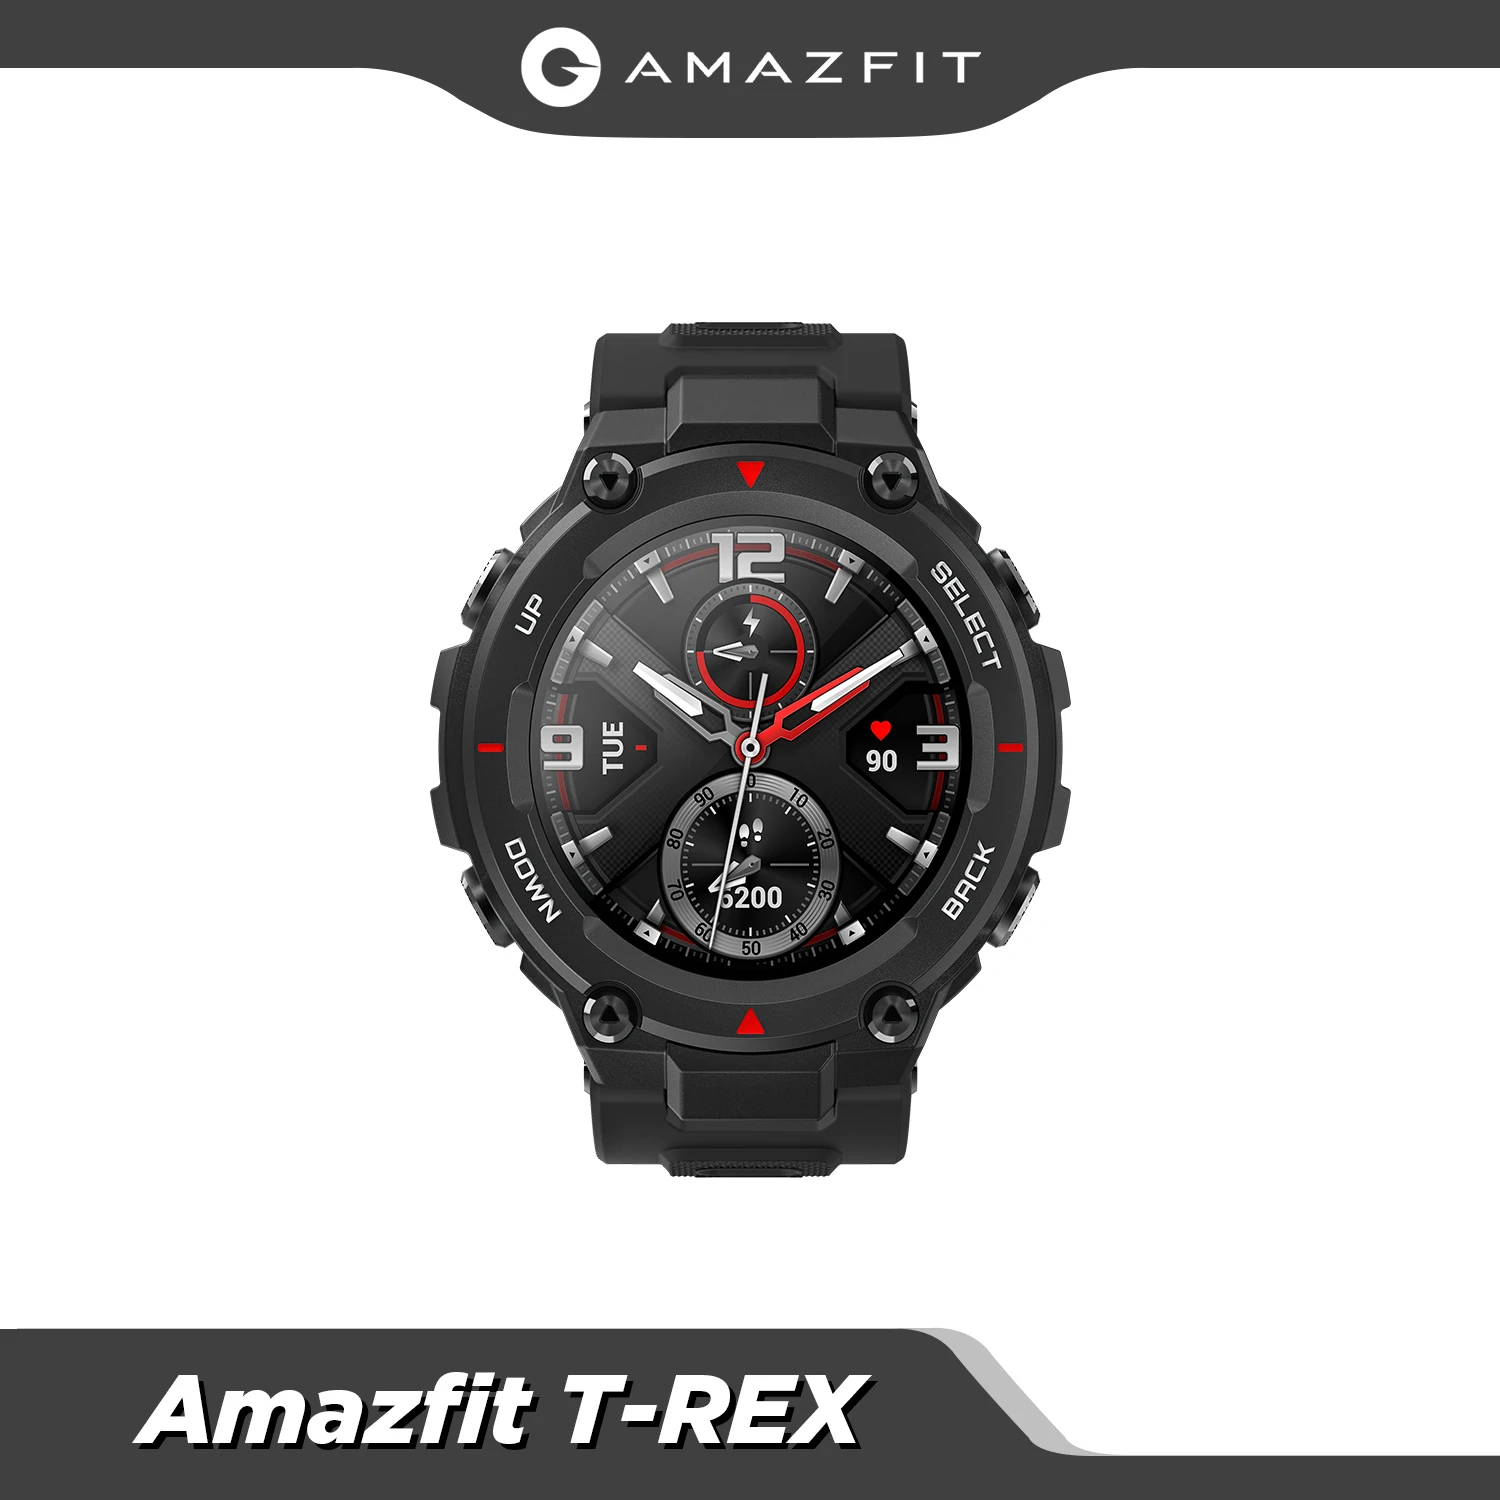 

In stock 2020 CES Amazfit T-rex T rex Smartwatch 5ATM waterproof Smart Watch GPS/GLONASS AMOLED Screen for iOS Android